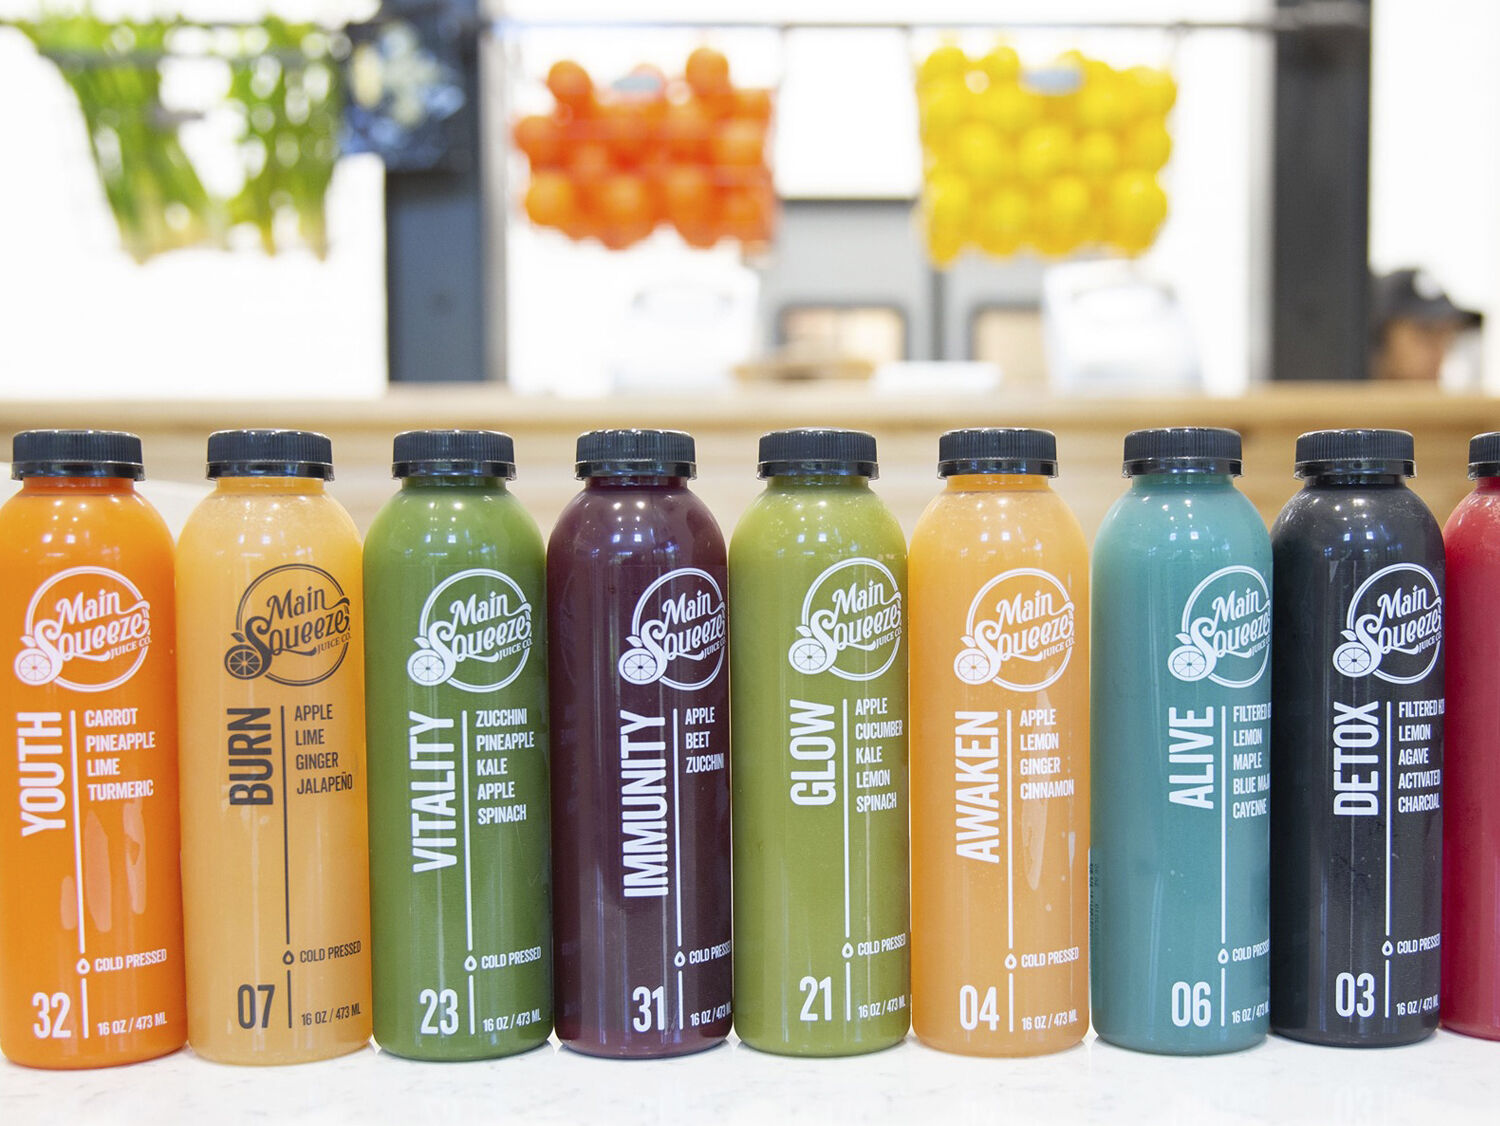 Main Squeeze Juice Co. is bringing its nutritionist-designed